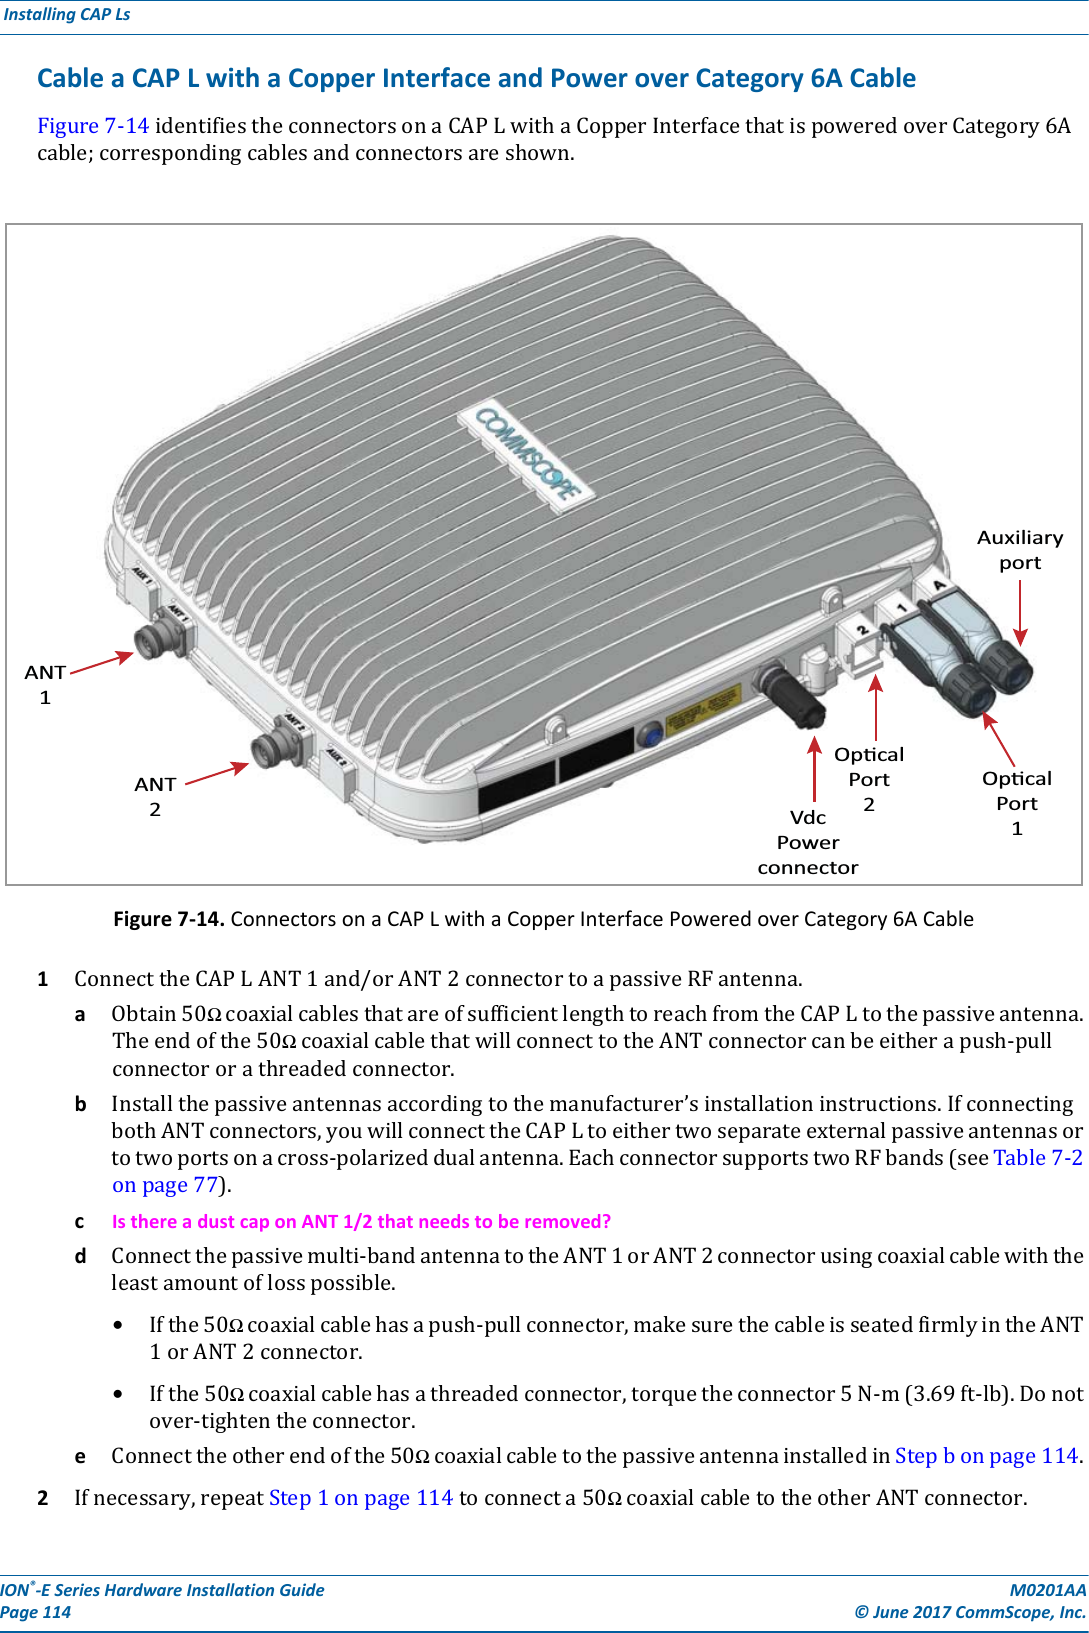 ION®-E Series Hardware Installation Guide M0201AA Page 114 © June 2017 CommScope, Inc. Installing CAP Ls  Cable a CAP L with a Copper Interface and Power over Category 6A CableFigure7-14identifiestheconnectorsonaCAPLwithaCopperInterfacethatispoweredoverCategory6Acable;correspondingcablesandconnectorsareshown.Figure 7-14. Connectors on a CAP L with a Copper Interface Powered over Category 6A Cable1ConnecttheCAPLANT1and/orANT2connectortoapassiveRFantenna.aObtain50ΩcoaxialcablesthatareofsufficientlengthtoreachfromtheCAPLtothepassiveantenna.Theendofthe50ΩcoaxialcablethatwillconnecttotheANTconnectorcanbeeitherapush-pullconnectororathreadedconnector.bInstallthepassiveantennasaccordingtothemanufacturer’sinstallationinstructions.IfconnectingbothANTconnectors,youwillconnecttheCAPLtoeithertwoseparateexternalpassiveantennasortotwoportsonacross-polarizeddualantenna.EachconnectorsupportstwoRFbands(seeTable7-2onpage77).cIs there a dust cap on ANT 1/2 that needs to be removed?dConnectthepassivemulti-bandantennatotheANT1orANT2connectorusingcoaxialcablewiththeleastamountoflosspossible.•Ifthe50Ωcoaxialcablehasapush-pullconnector,makesurethecableisseatedfirmlyintheANT1orANT2connector.•Ifthe50Ωcoaxialcablehasathreadedconnector,torquetheconnector5N-m(3.69ft-lb).Donotover-tightentheconnector.eConnecttheotherendofthe50ΩcoaxialcabletothepassiveantennainstalledinStepbonpage114.2Ifnecessary,repeatStep1onpage114toconnecta50ΩcoaxialcabletotheotherANTconnector.ANT1ANT2VdcPowerconnectorOpcalPort2OpcalPort1Auxiliaryport